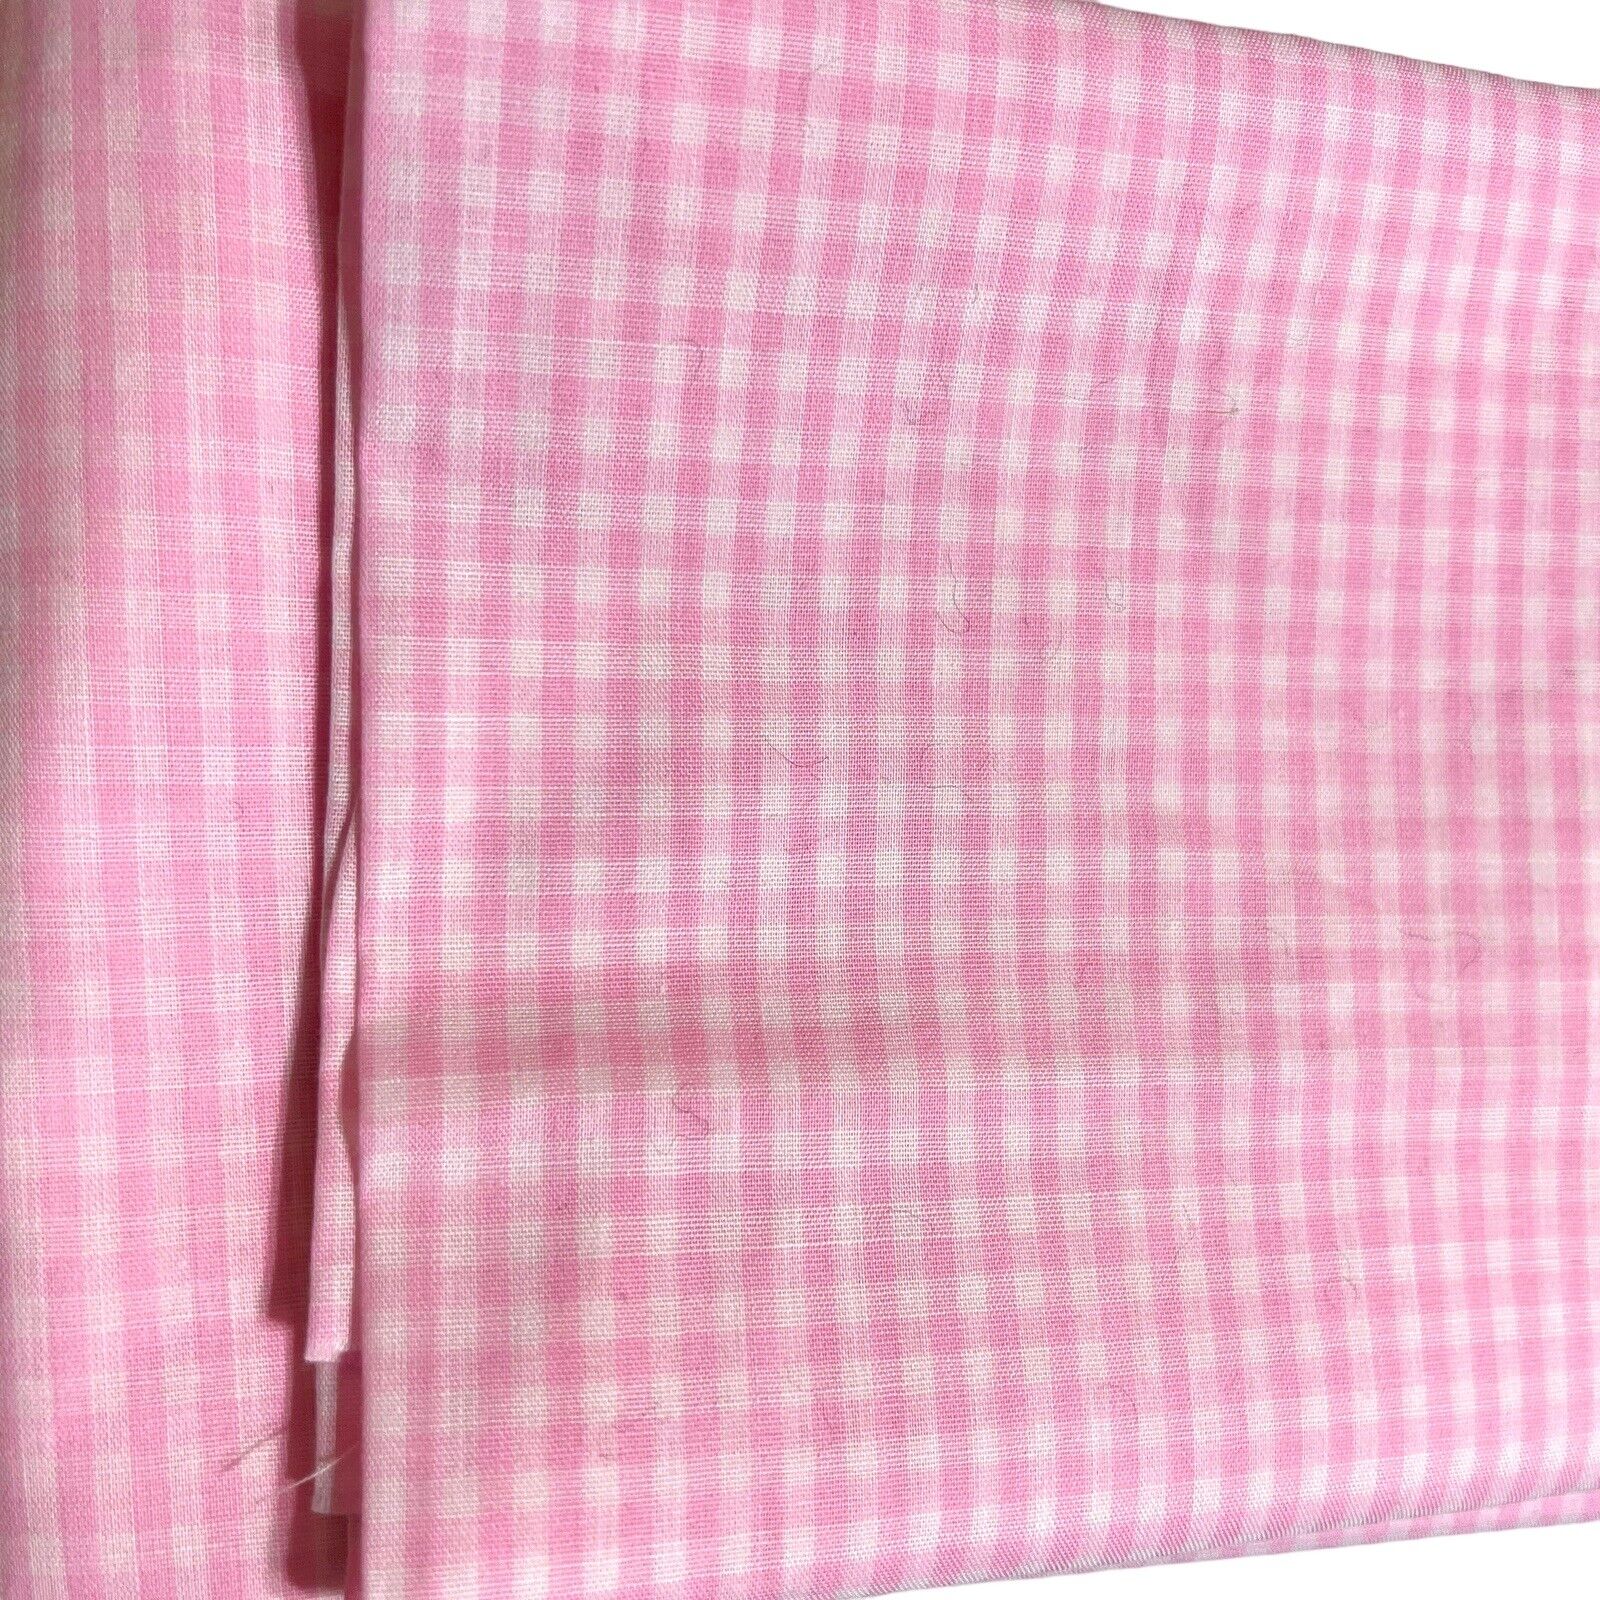 Vintage Cotton Fabric Gingham Check Light Pink 1/8” Block 1 yard X 45 Inches